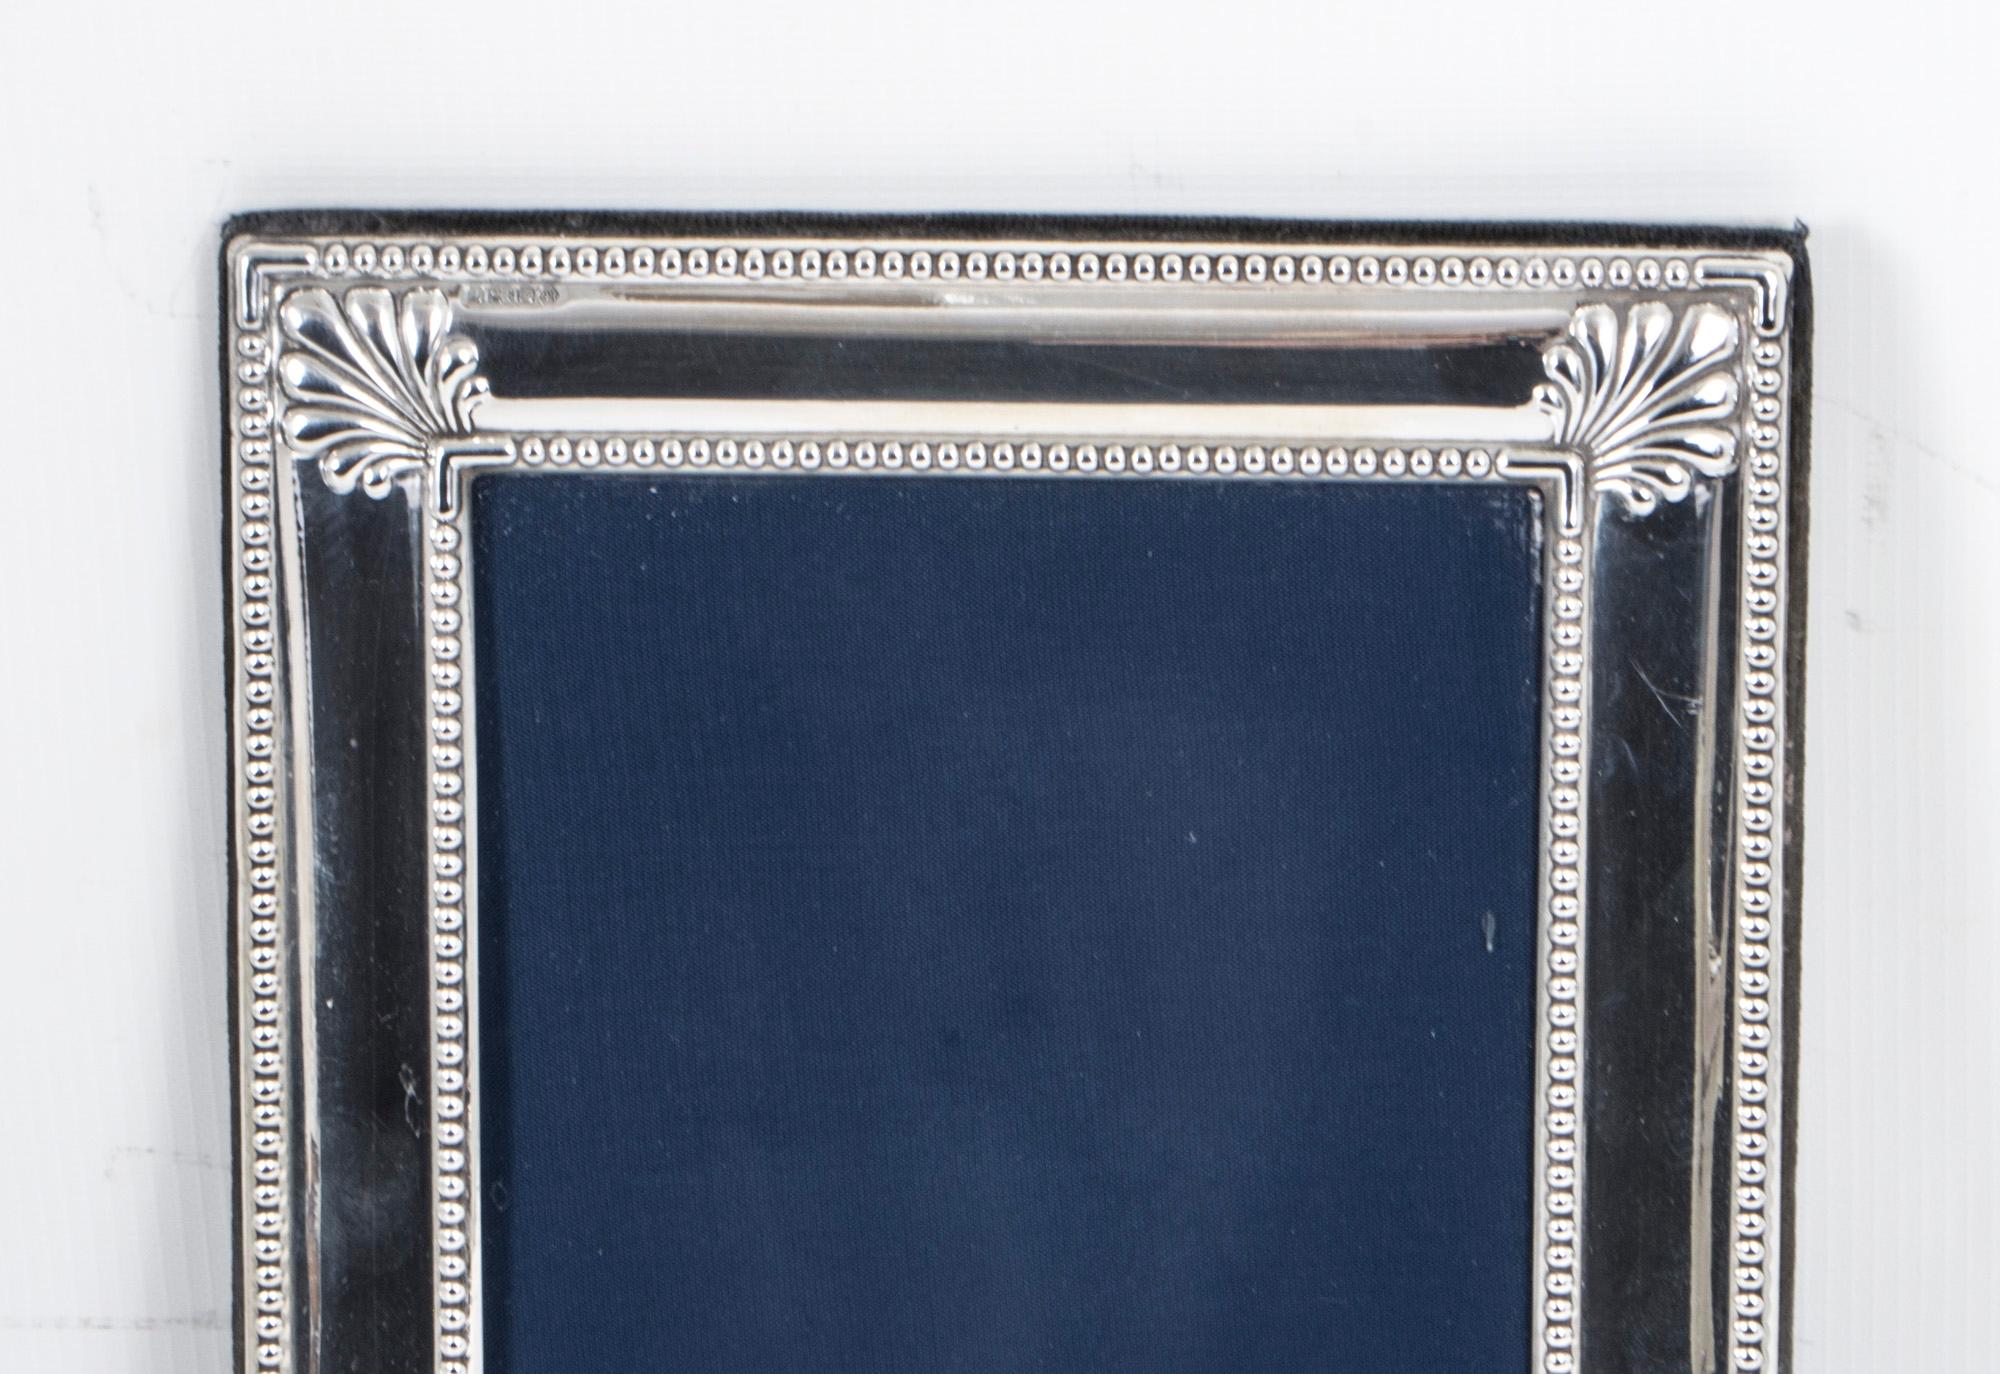 A truly superb medium size Neo classical style photo frame in sterling silver.

Hallmarked for London 1993 with the silversmith's mark for Richard Comyns. 
The vertical frame has a blue velvet back and has a beaded bordered with shell motifs to